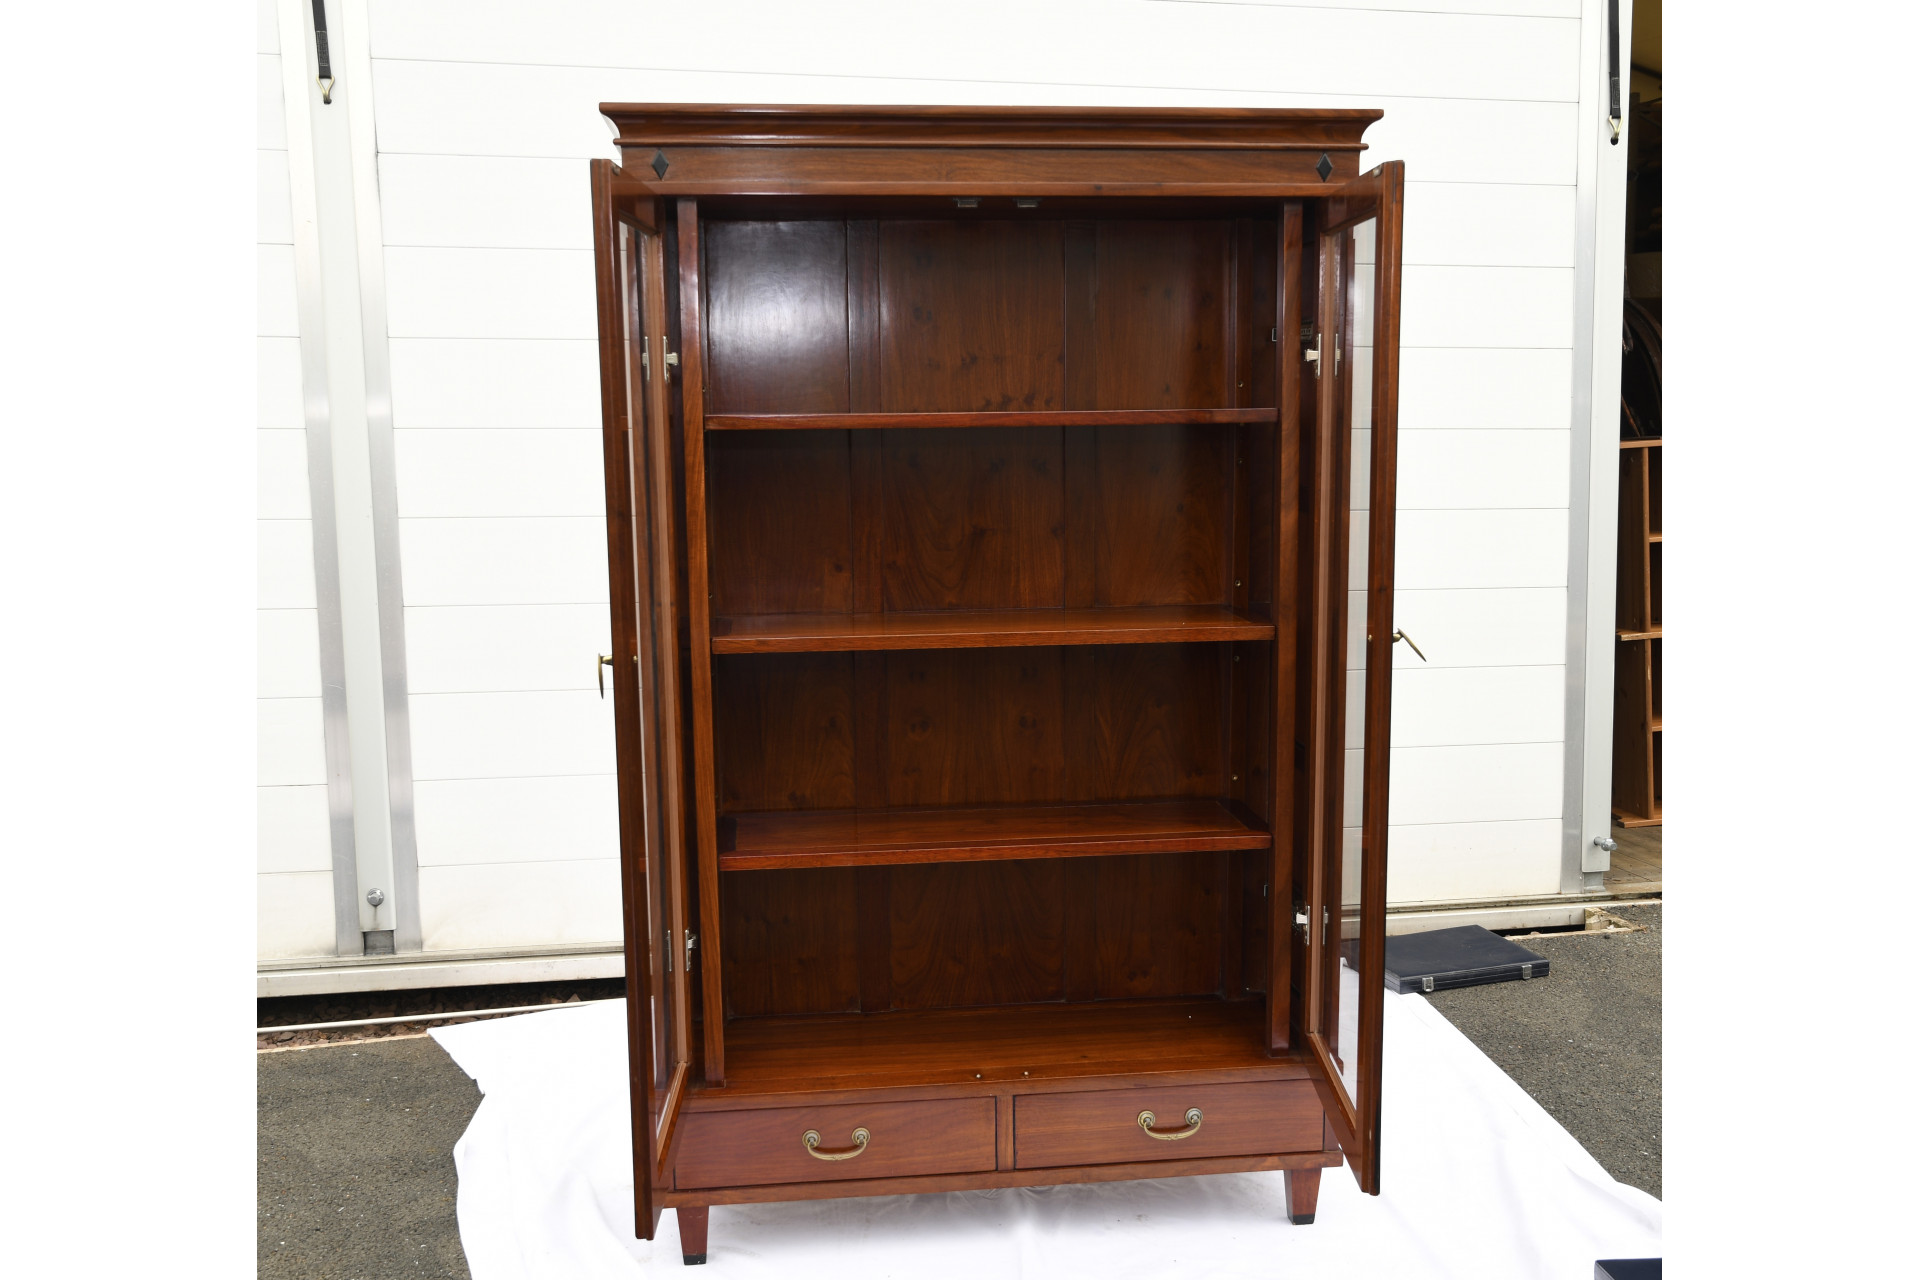 Document Display Cabinet in Rosewood